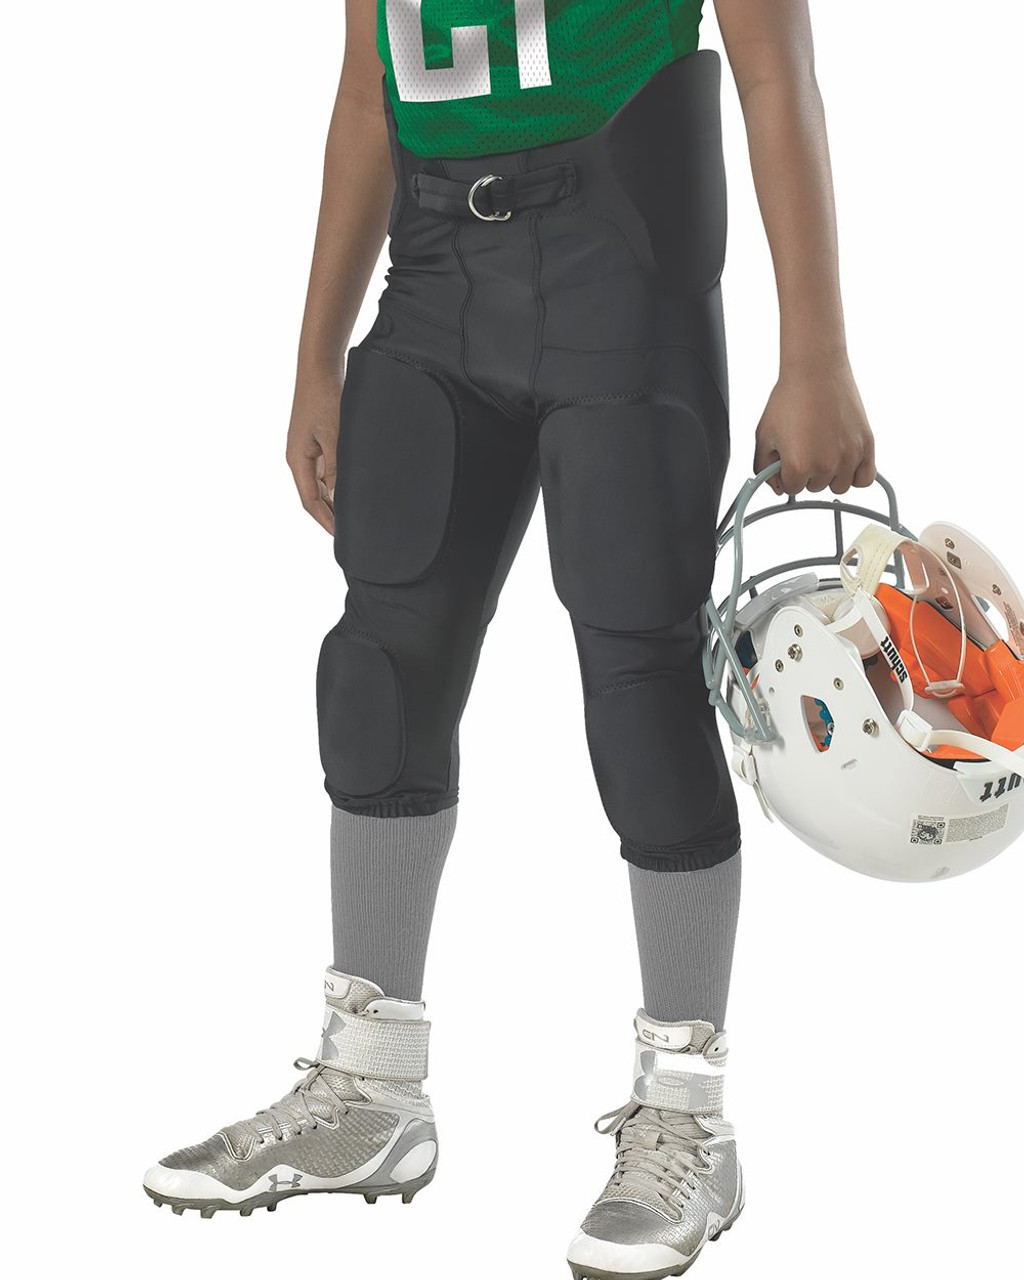 Embroidered Youth Intergrated Football Pants - 689SY